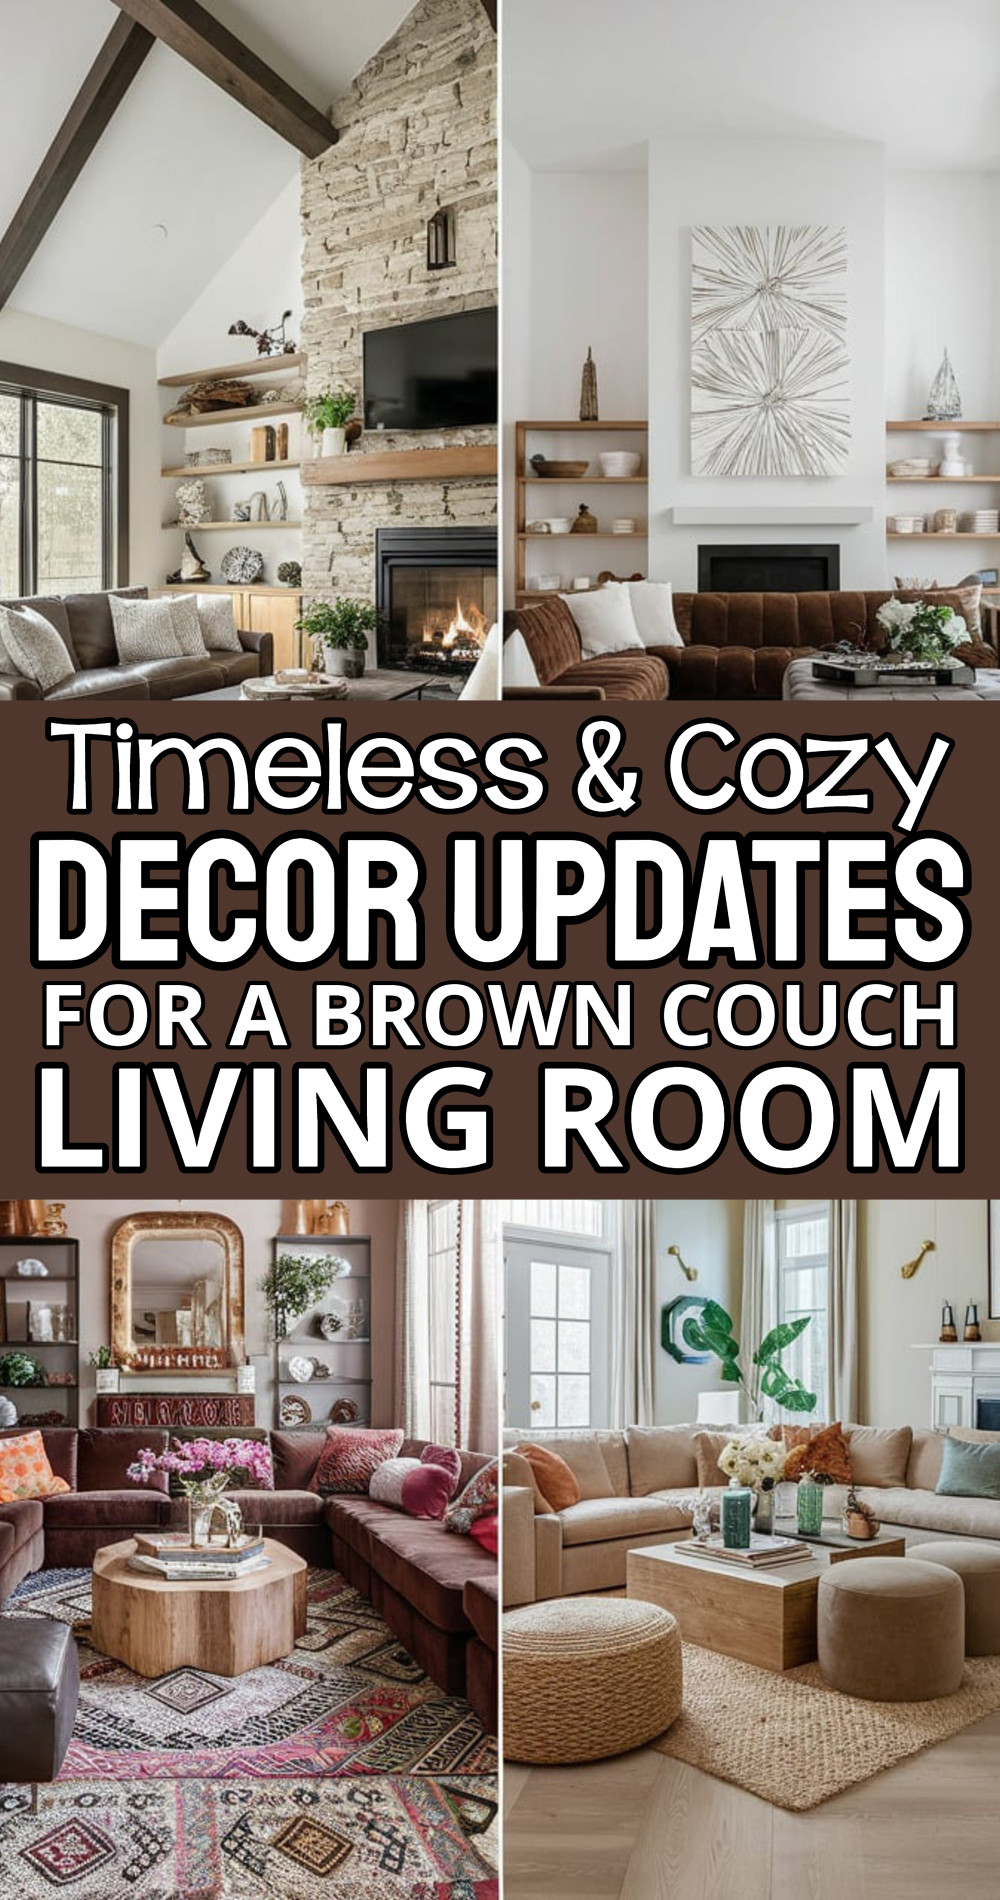 Timeless and Cozy Decor updates For a Brown Couch Living Room